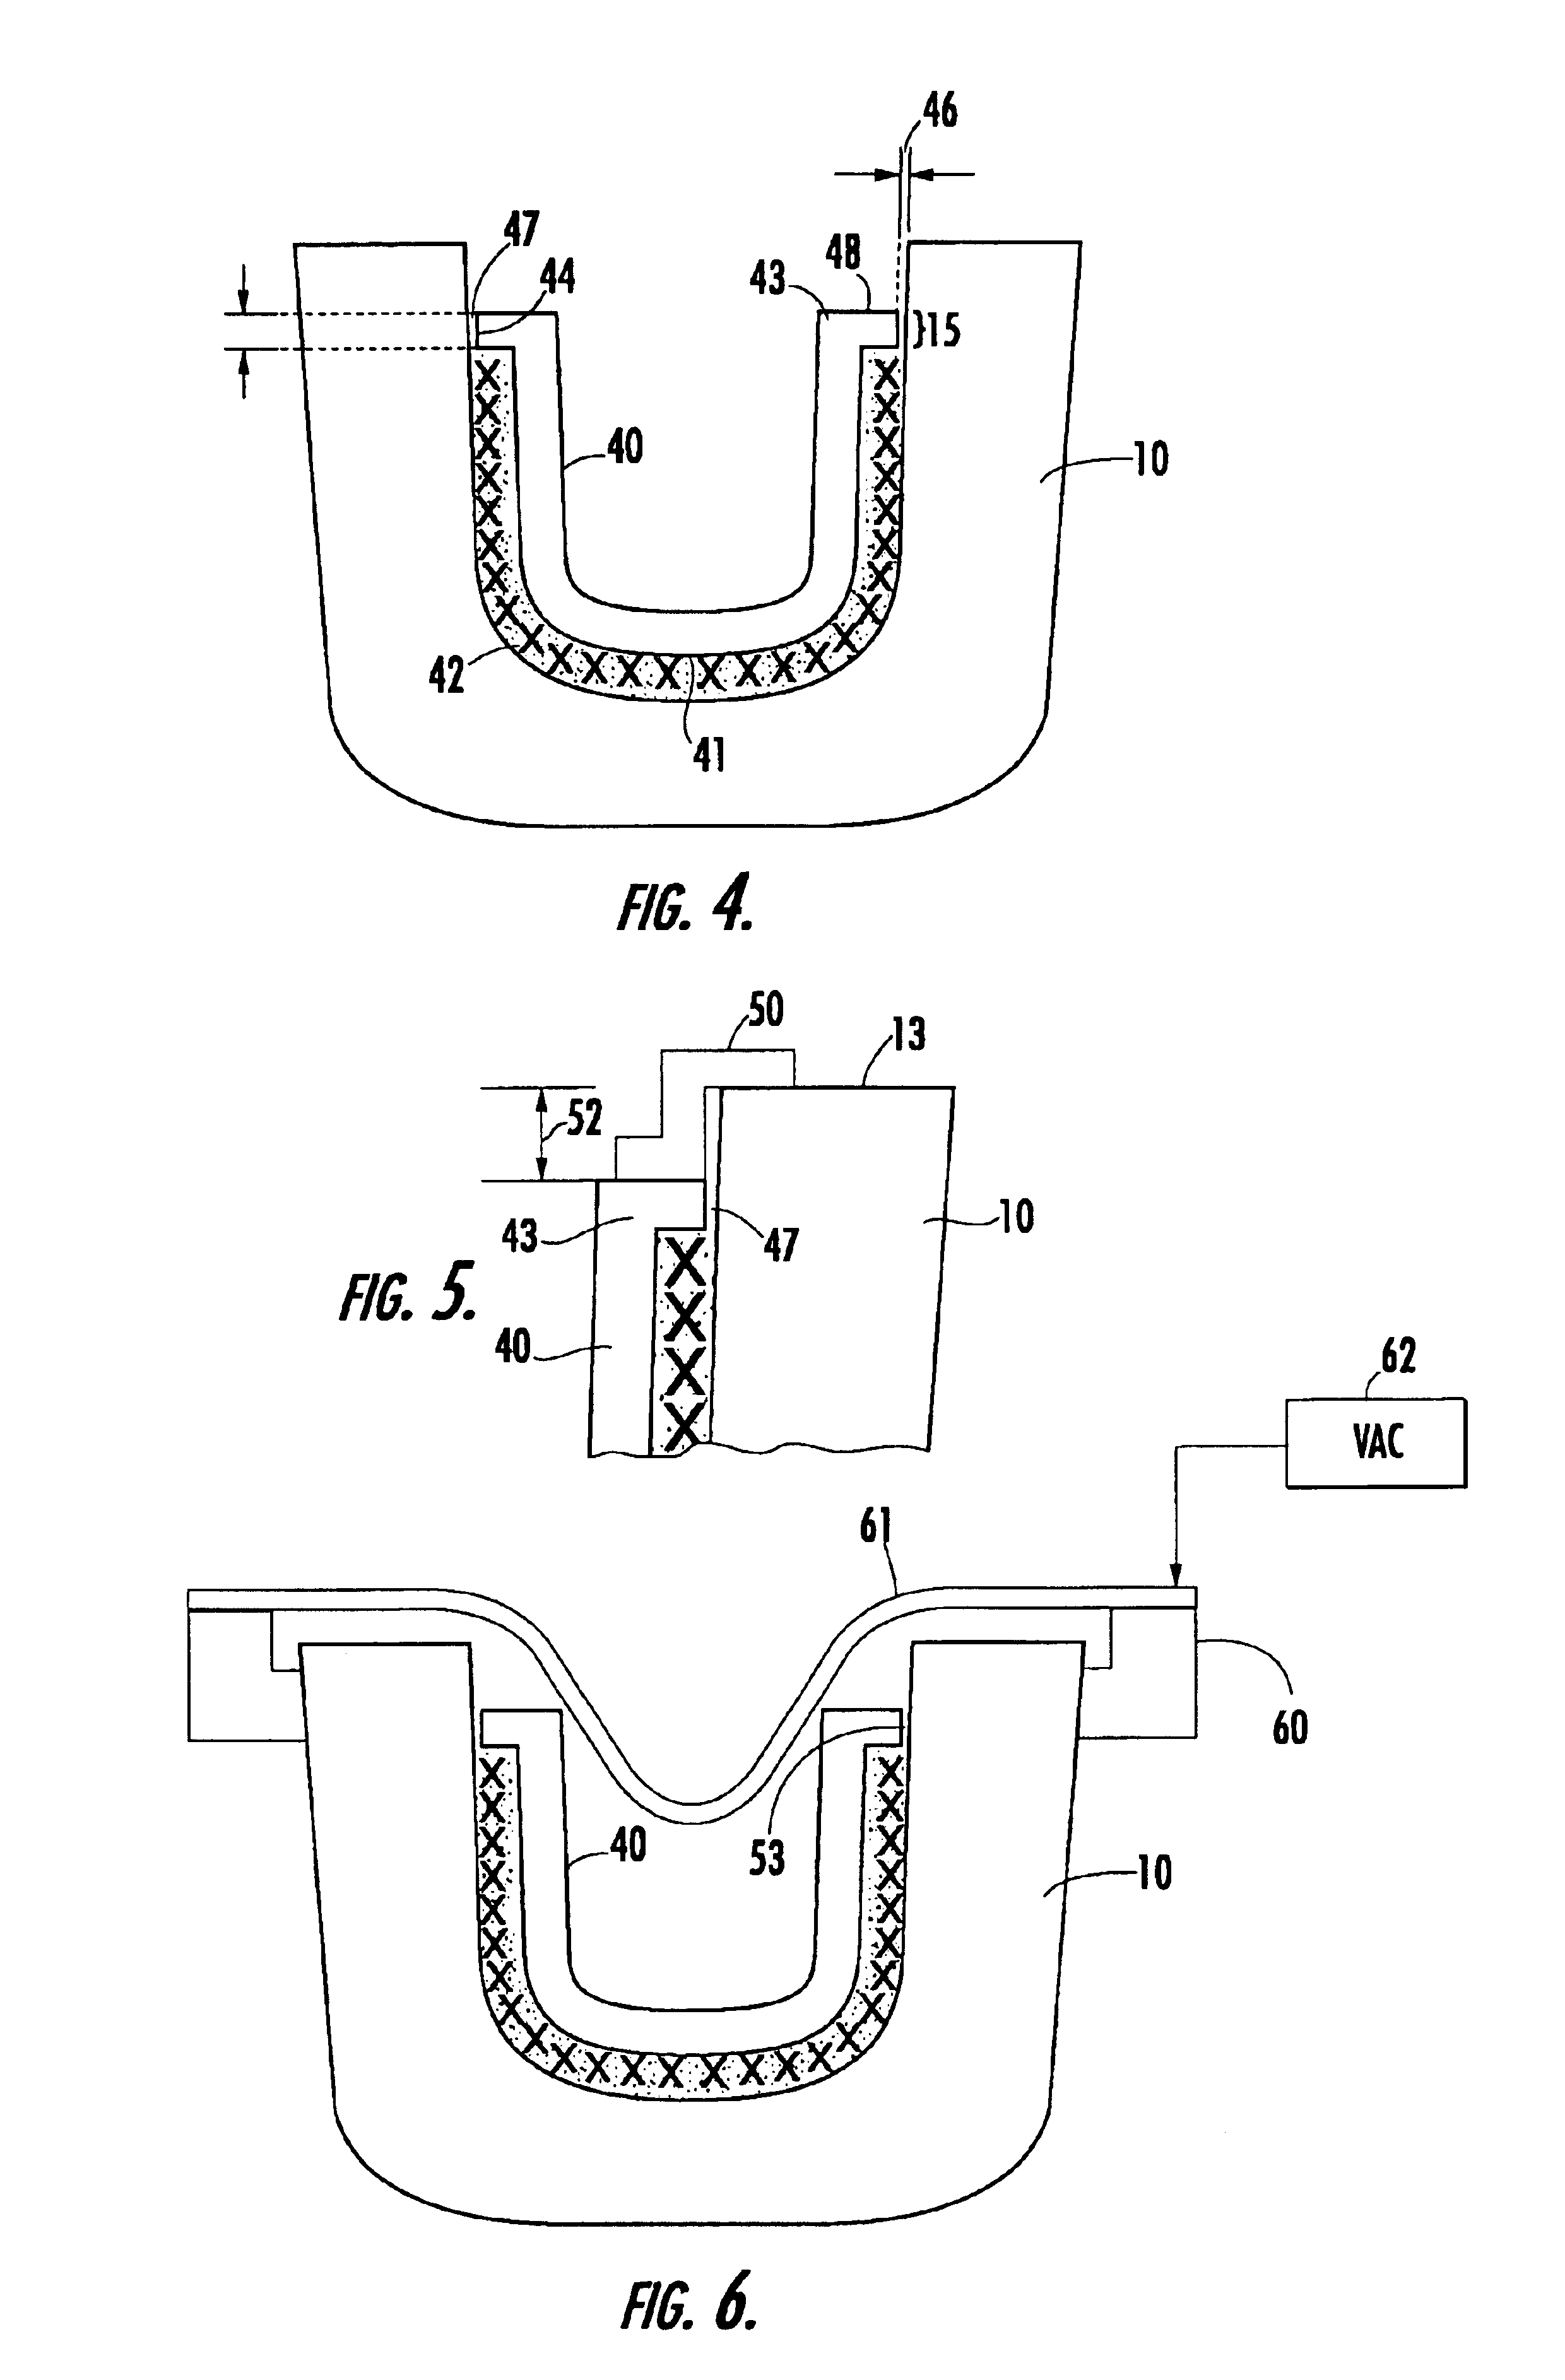 Mandrel-assisted resin transfer molding process employing resin outflow perimeter channel between male and female mold elements